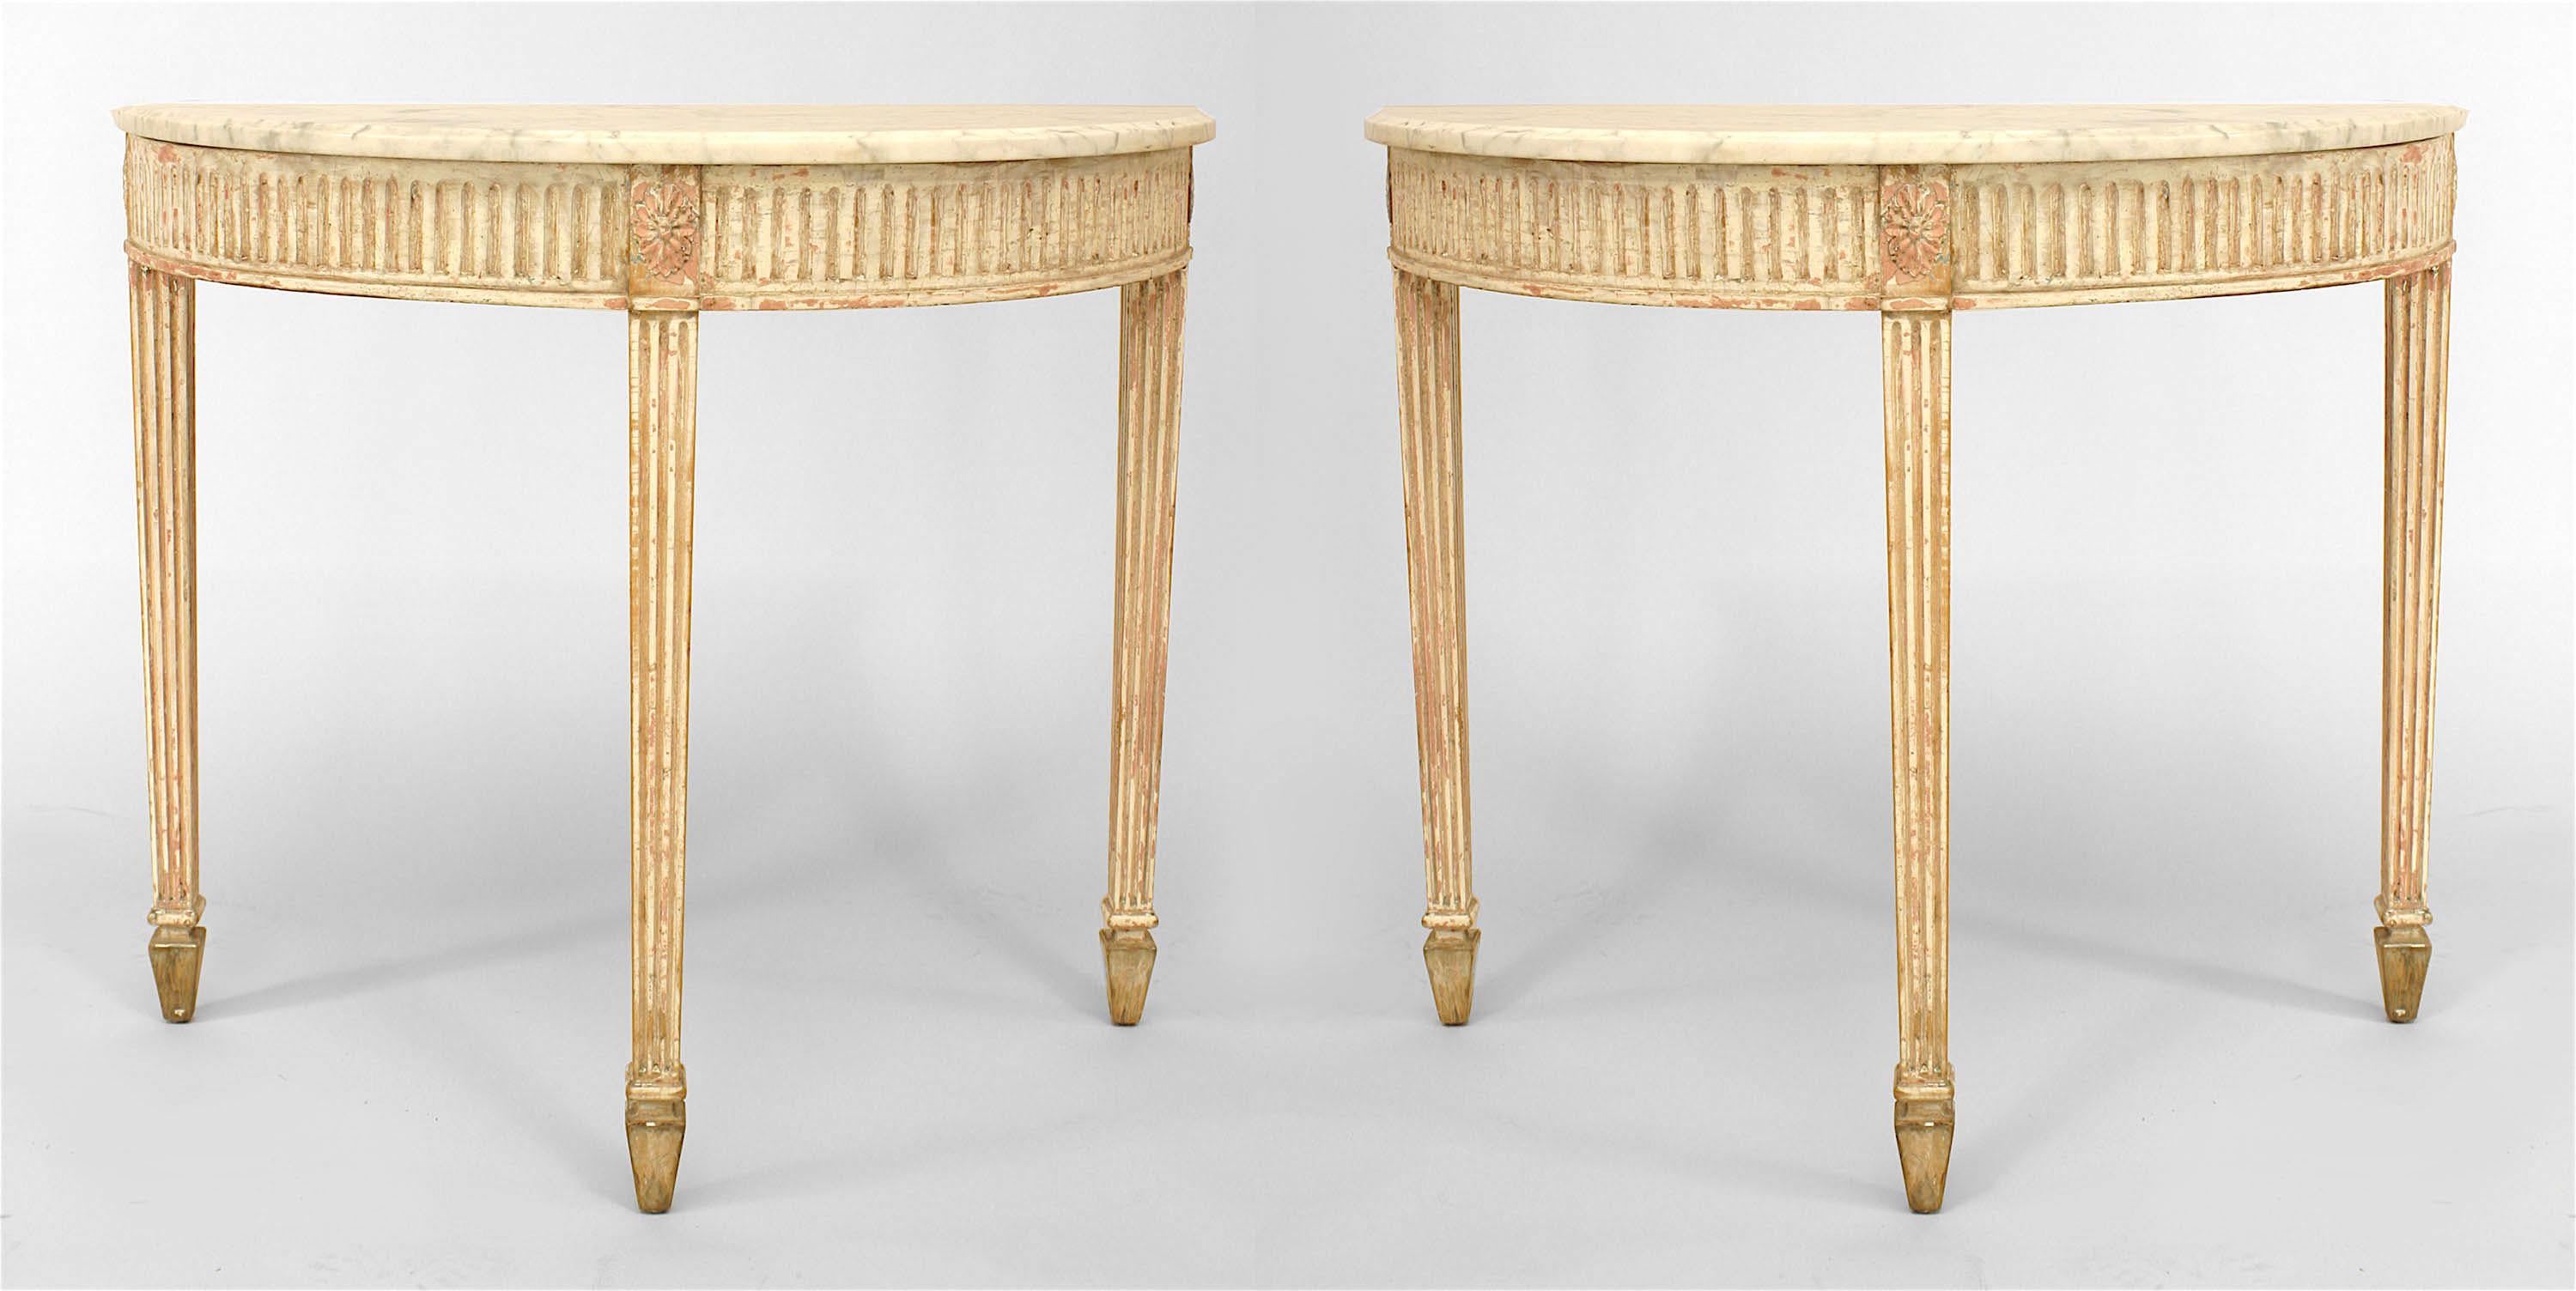 Pair of nineteenth century Swedish Gustavian white painted demilune consoles with white marble tops over fluted aprons and three fluted legs.